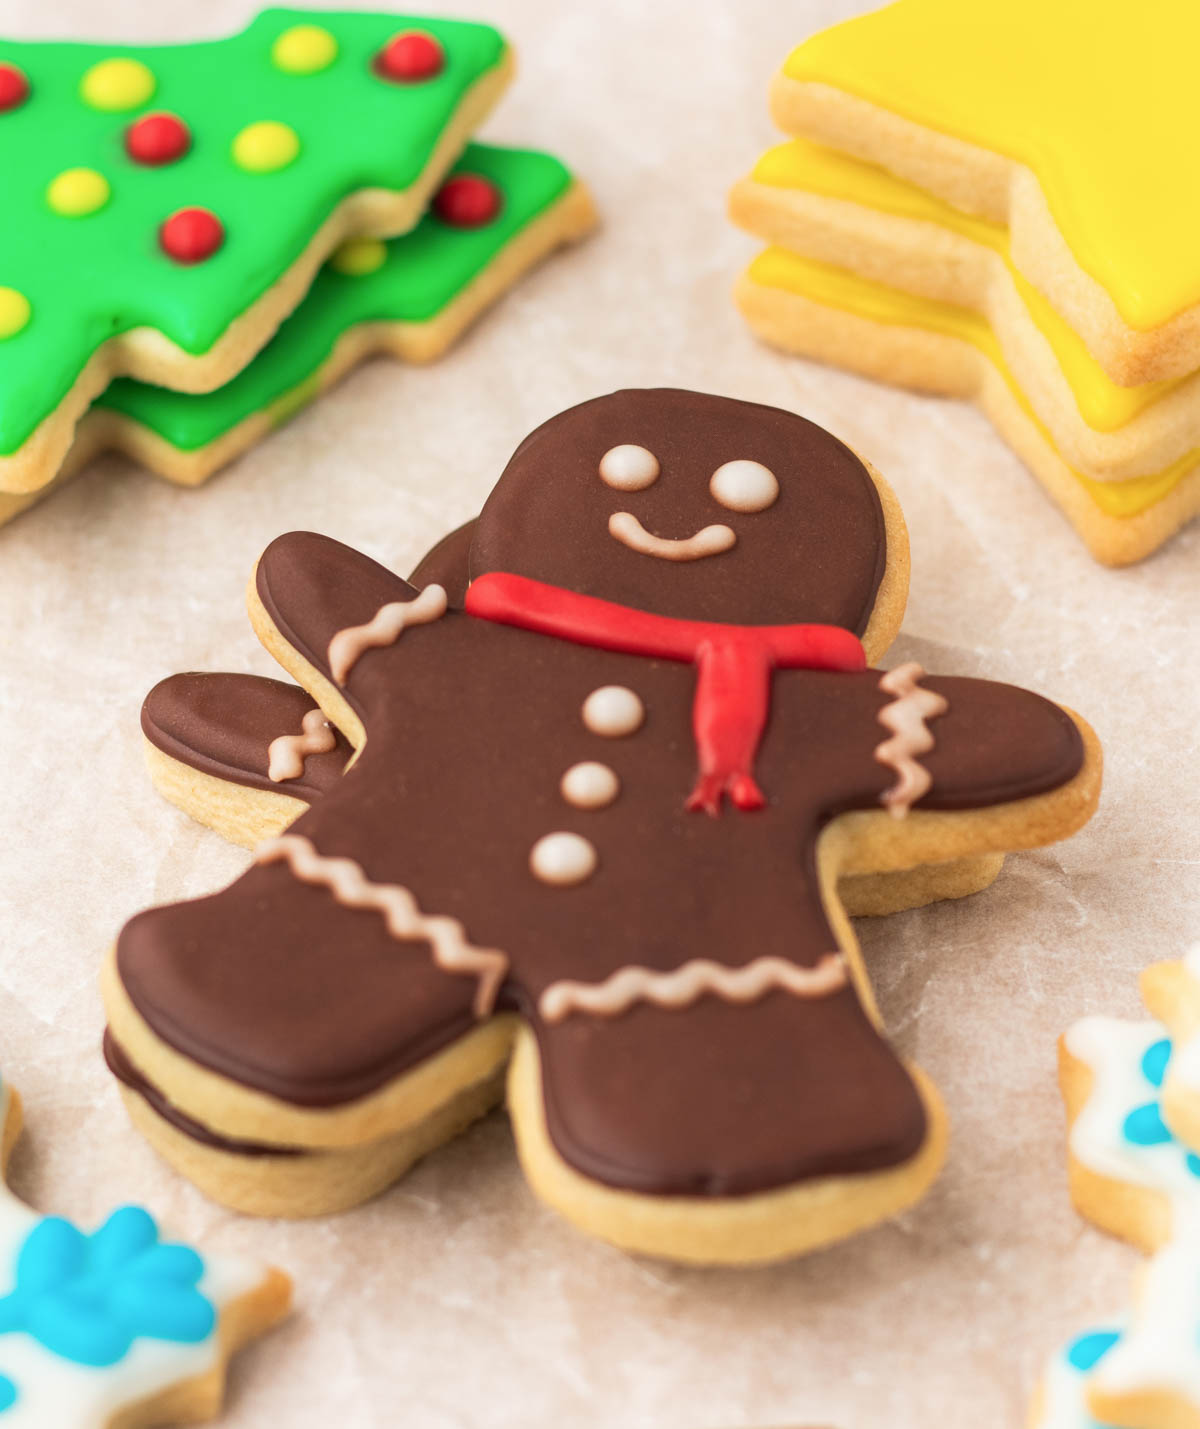 A group of gingerbread cookies with icing and decorations.